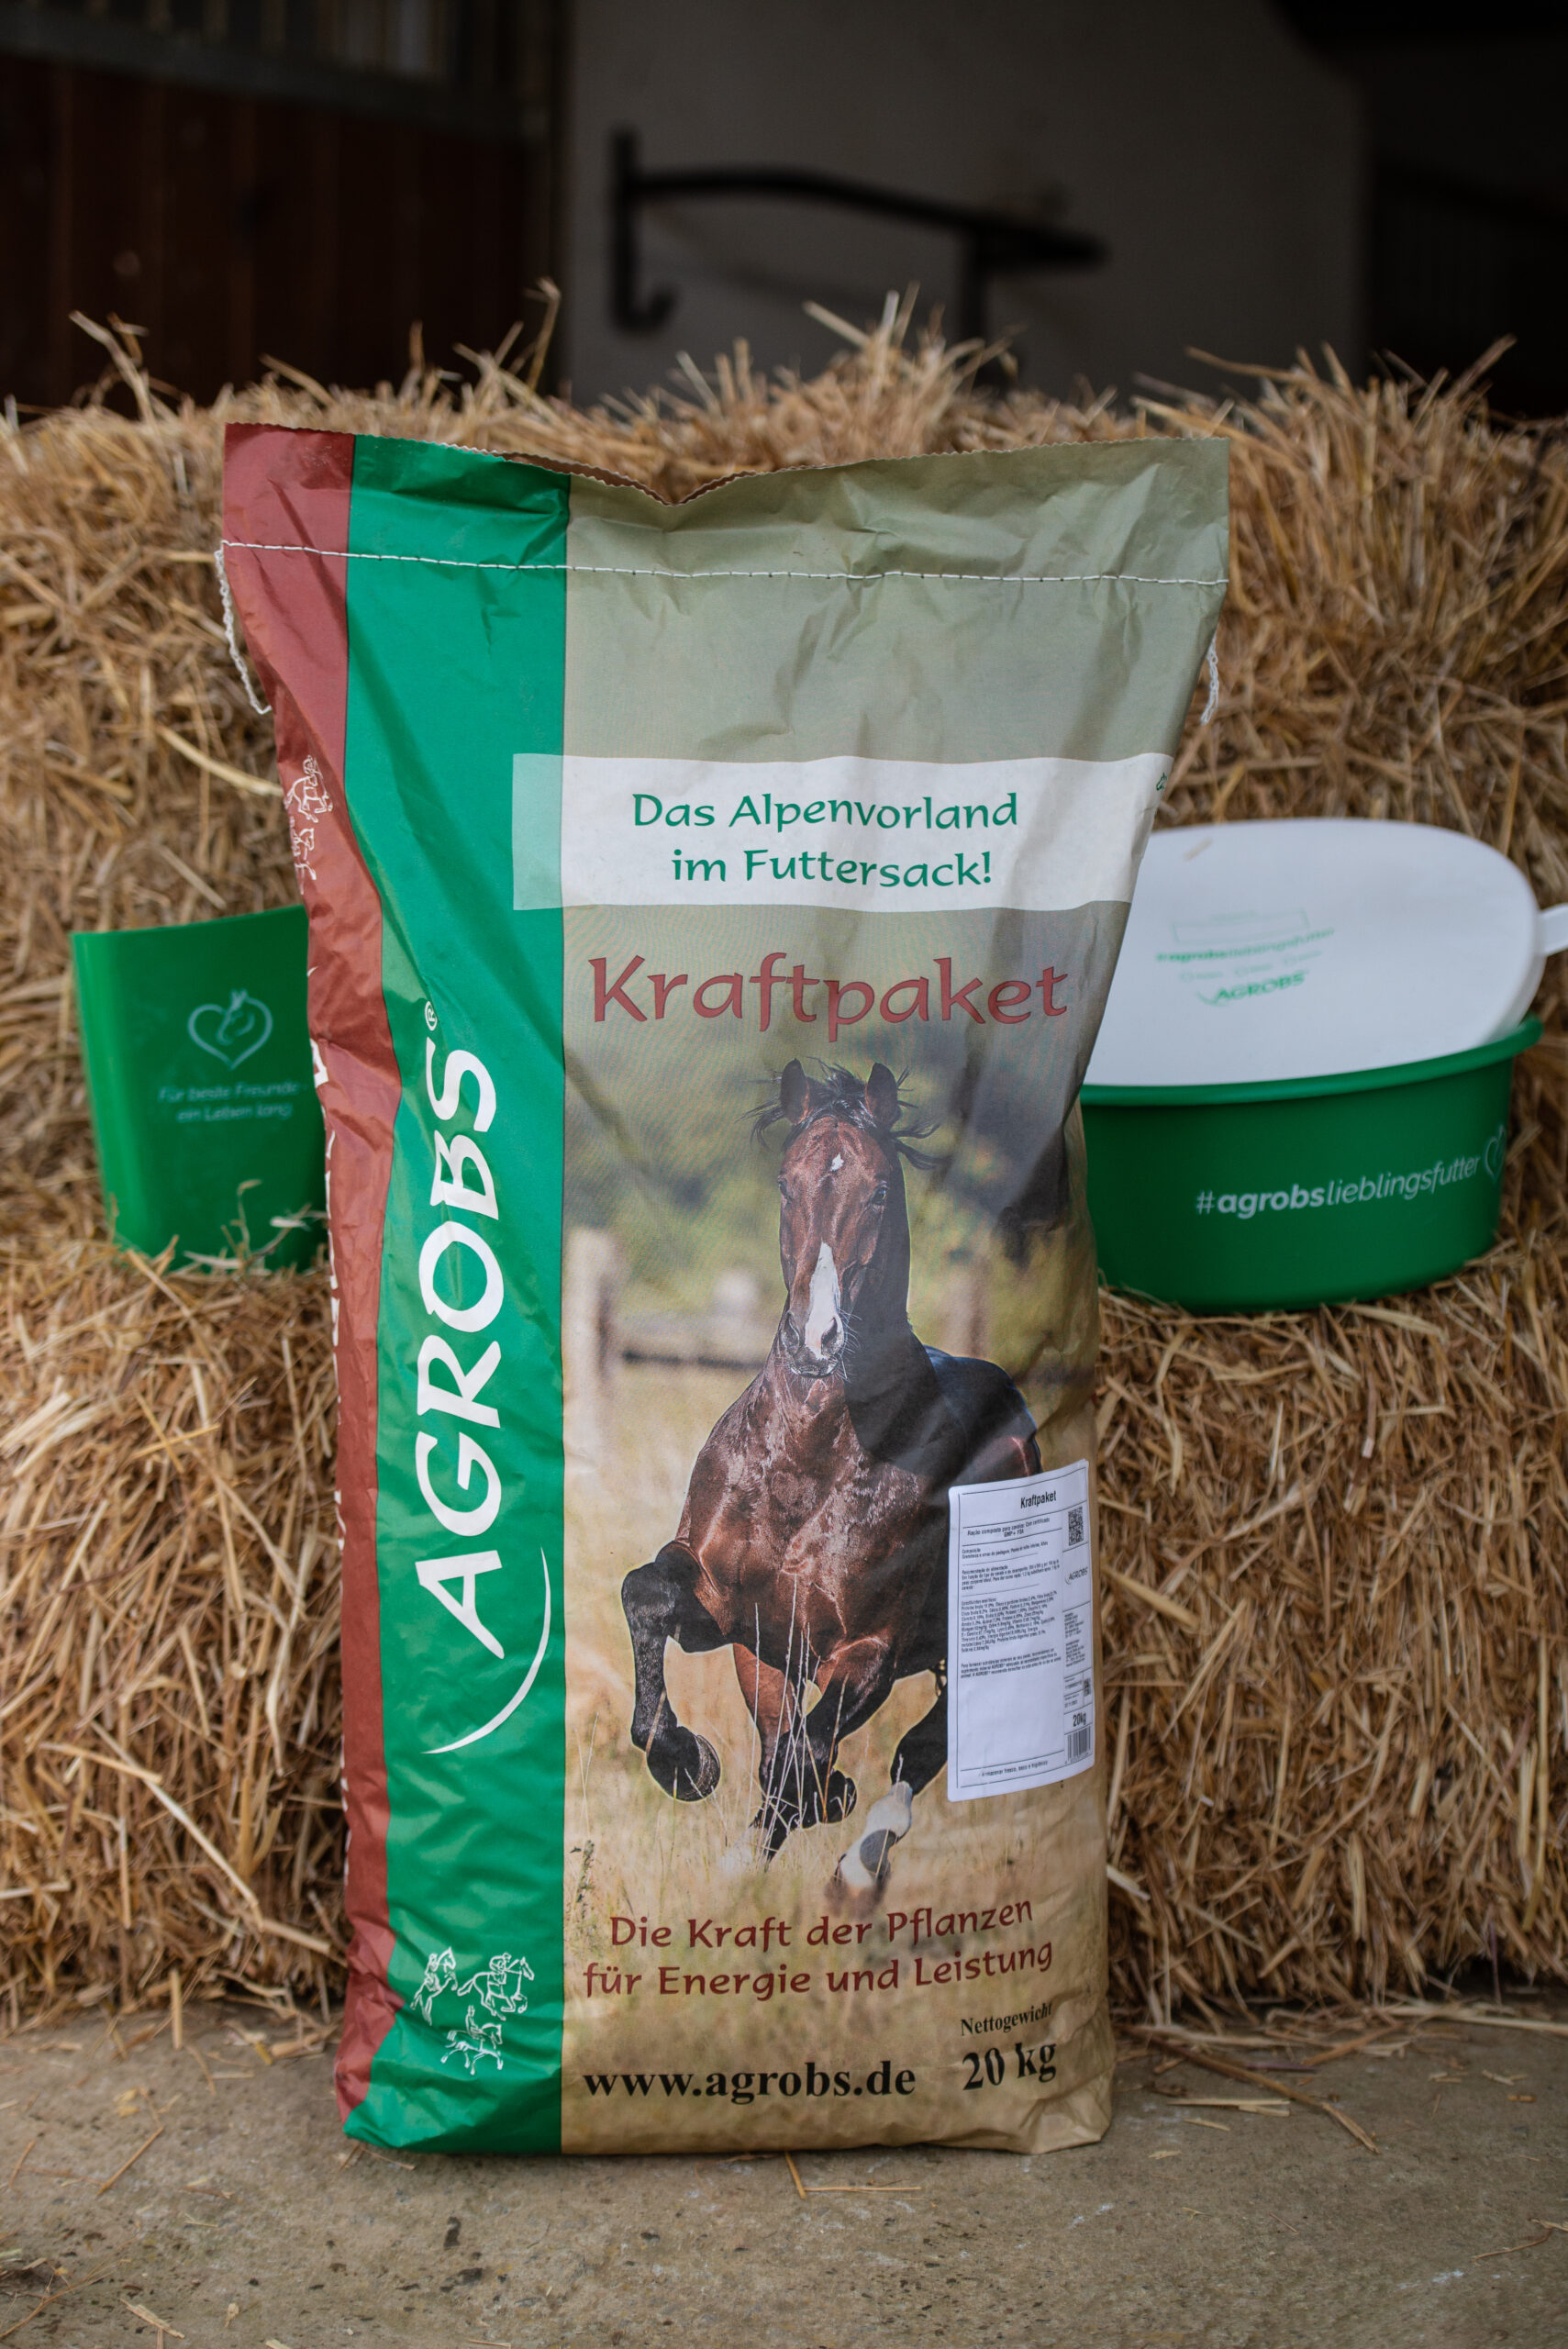 Big bag of Agrobs Kraftpaket product with feeding bowl and scoop